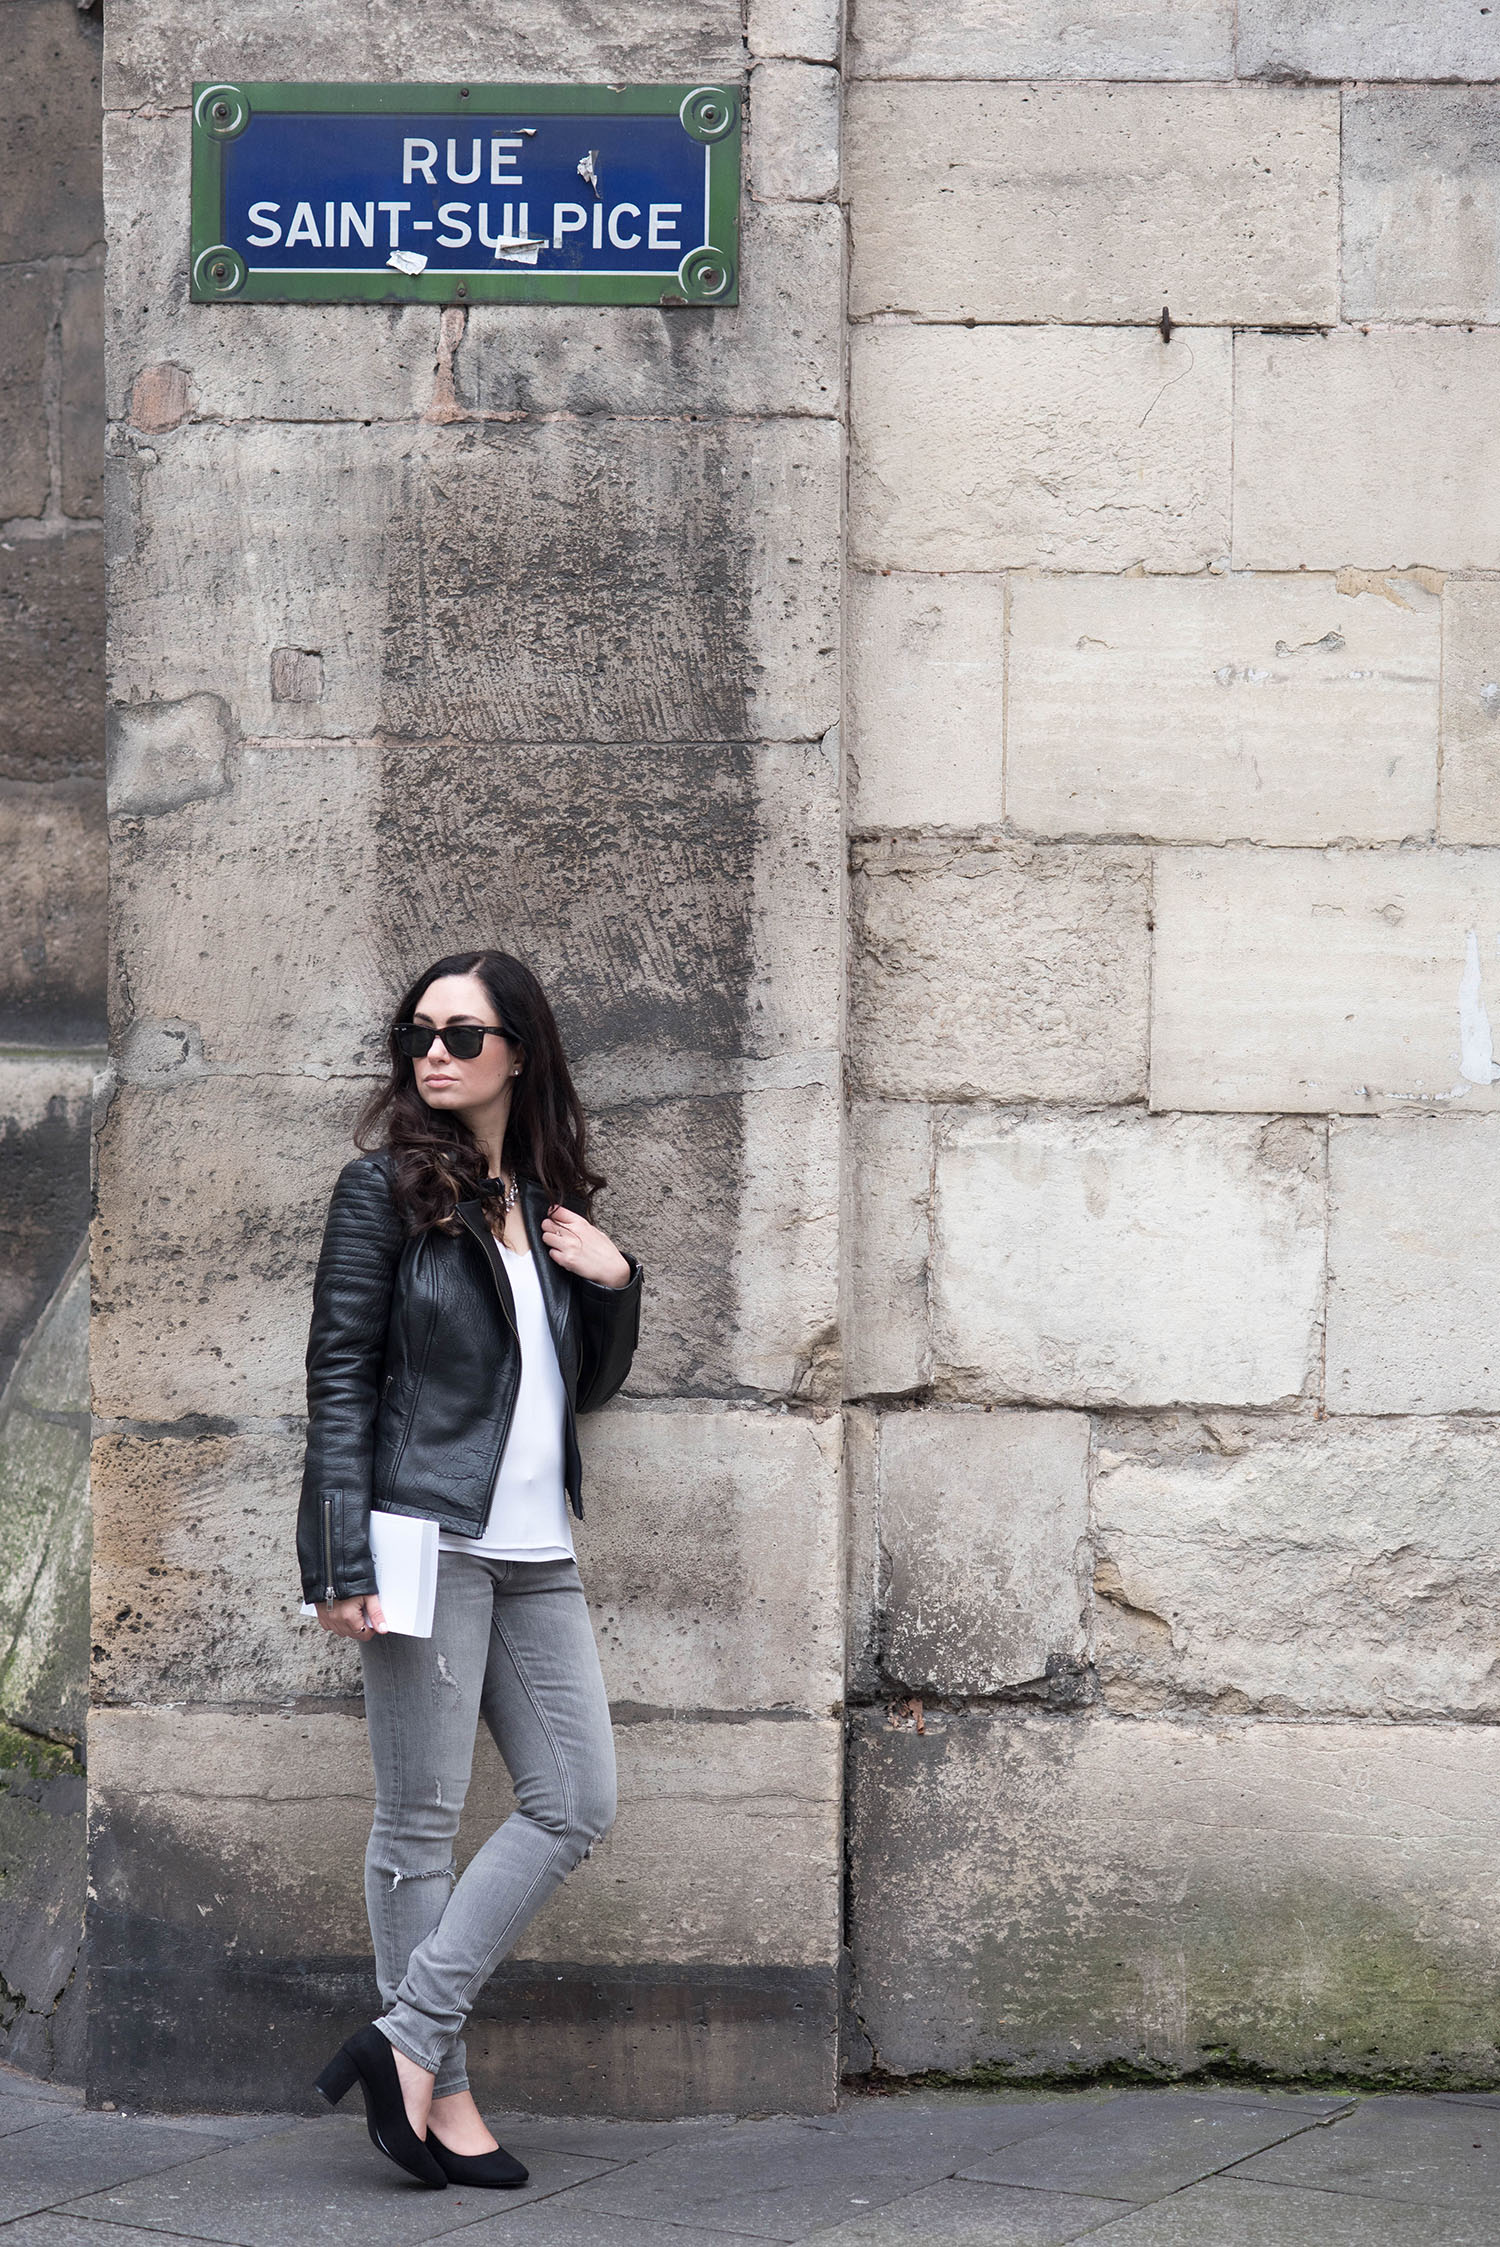 Personal style blogger Cee Fardoe of Coco & Vera stands on rue Saint-Sulpice wearing a Cupcakes & Cashmere jacket